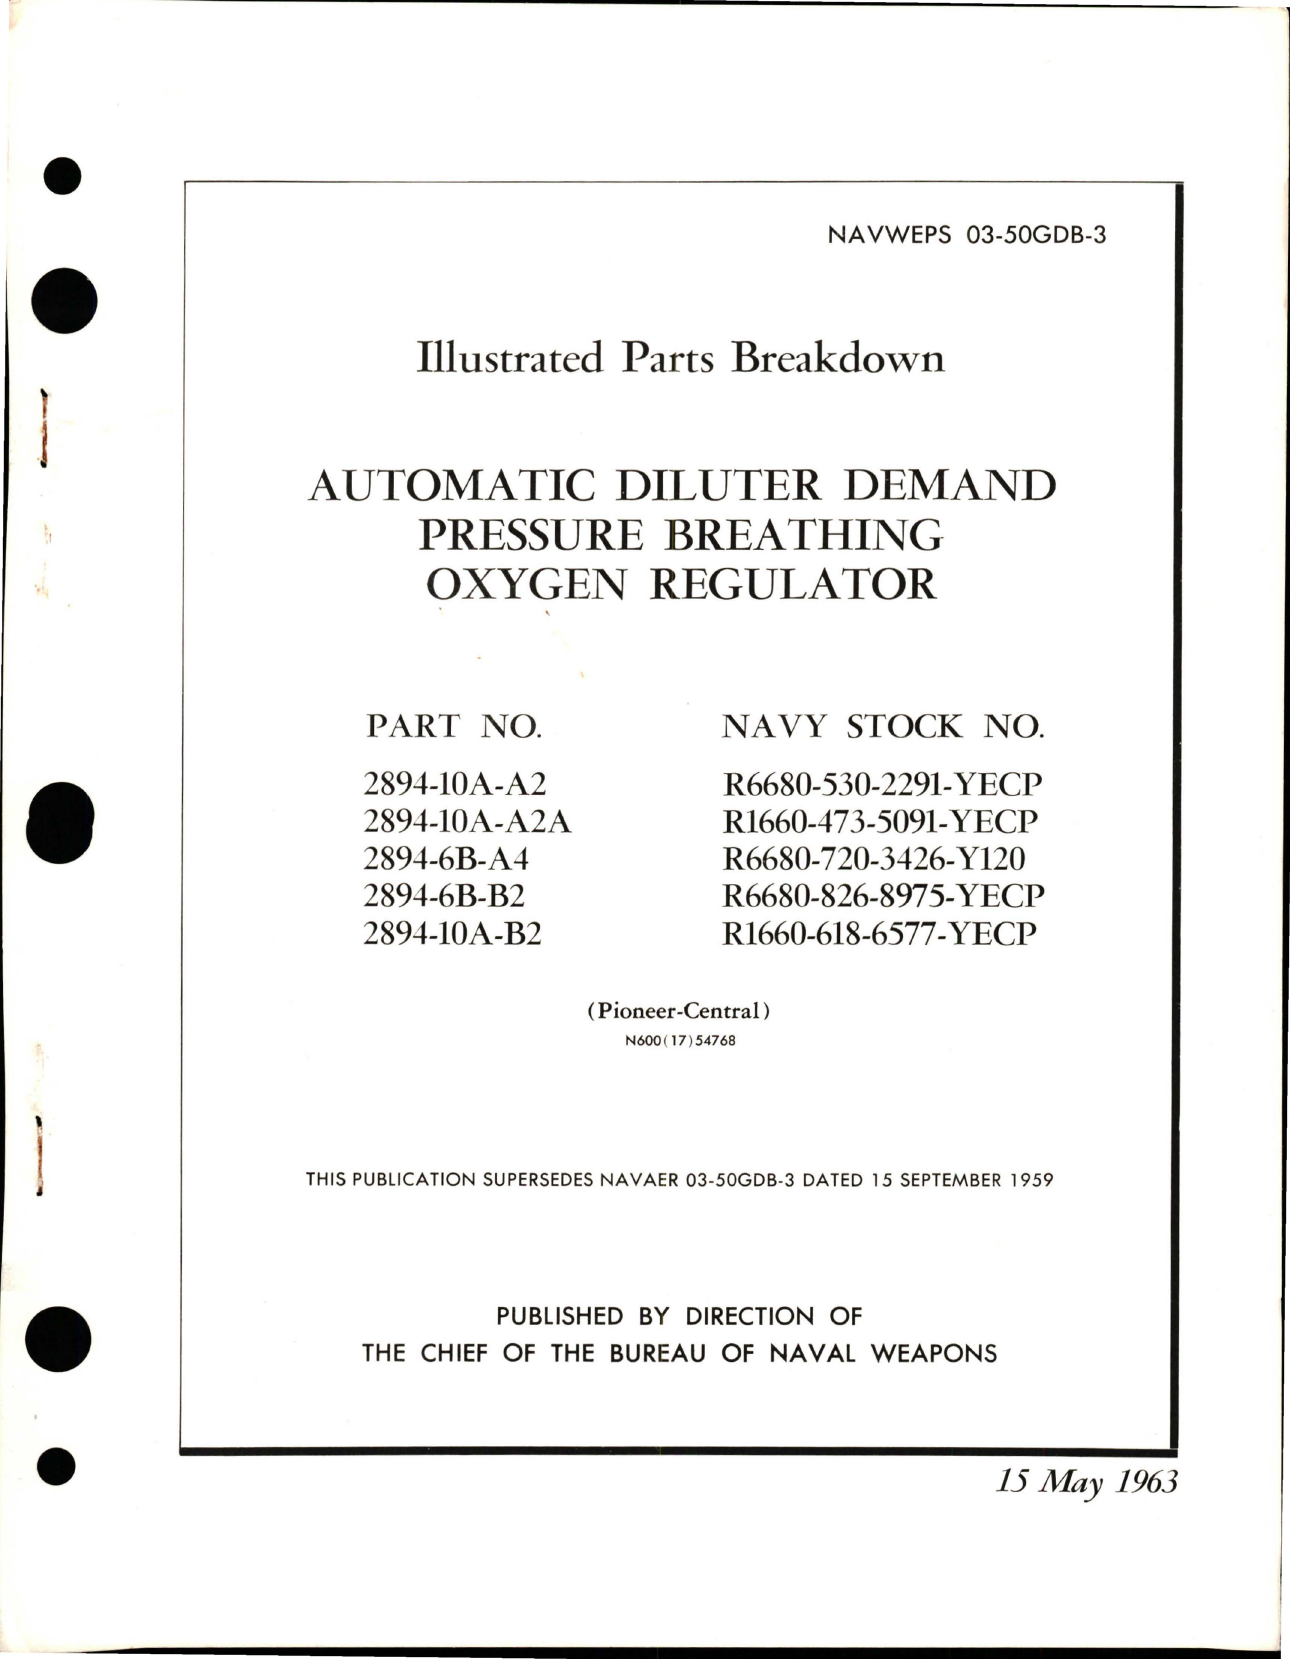 Sample page 1 from AirCorps Library document: Illustrated Parts Breakdown for Automatic Diluter Demand Pressure Breathing Oxygen Regulator - Parts 2894-10A-A2, 2894-10A-A2A, 2894-6B-A4, 2894-6B-B2, and 2894-10A-B2 